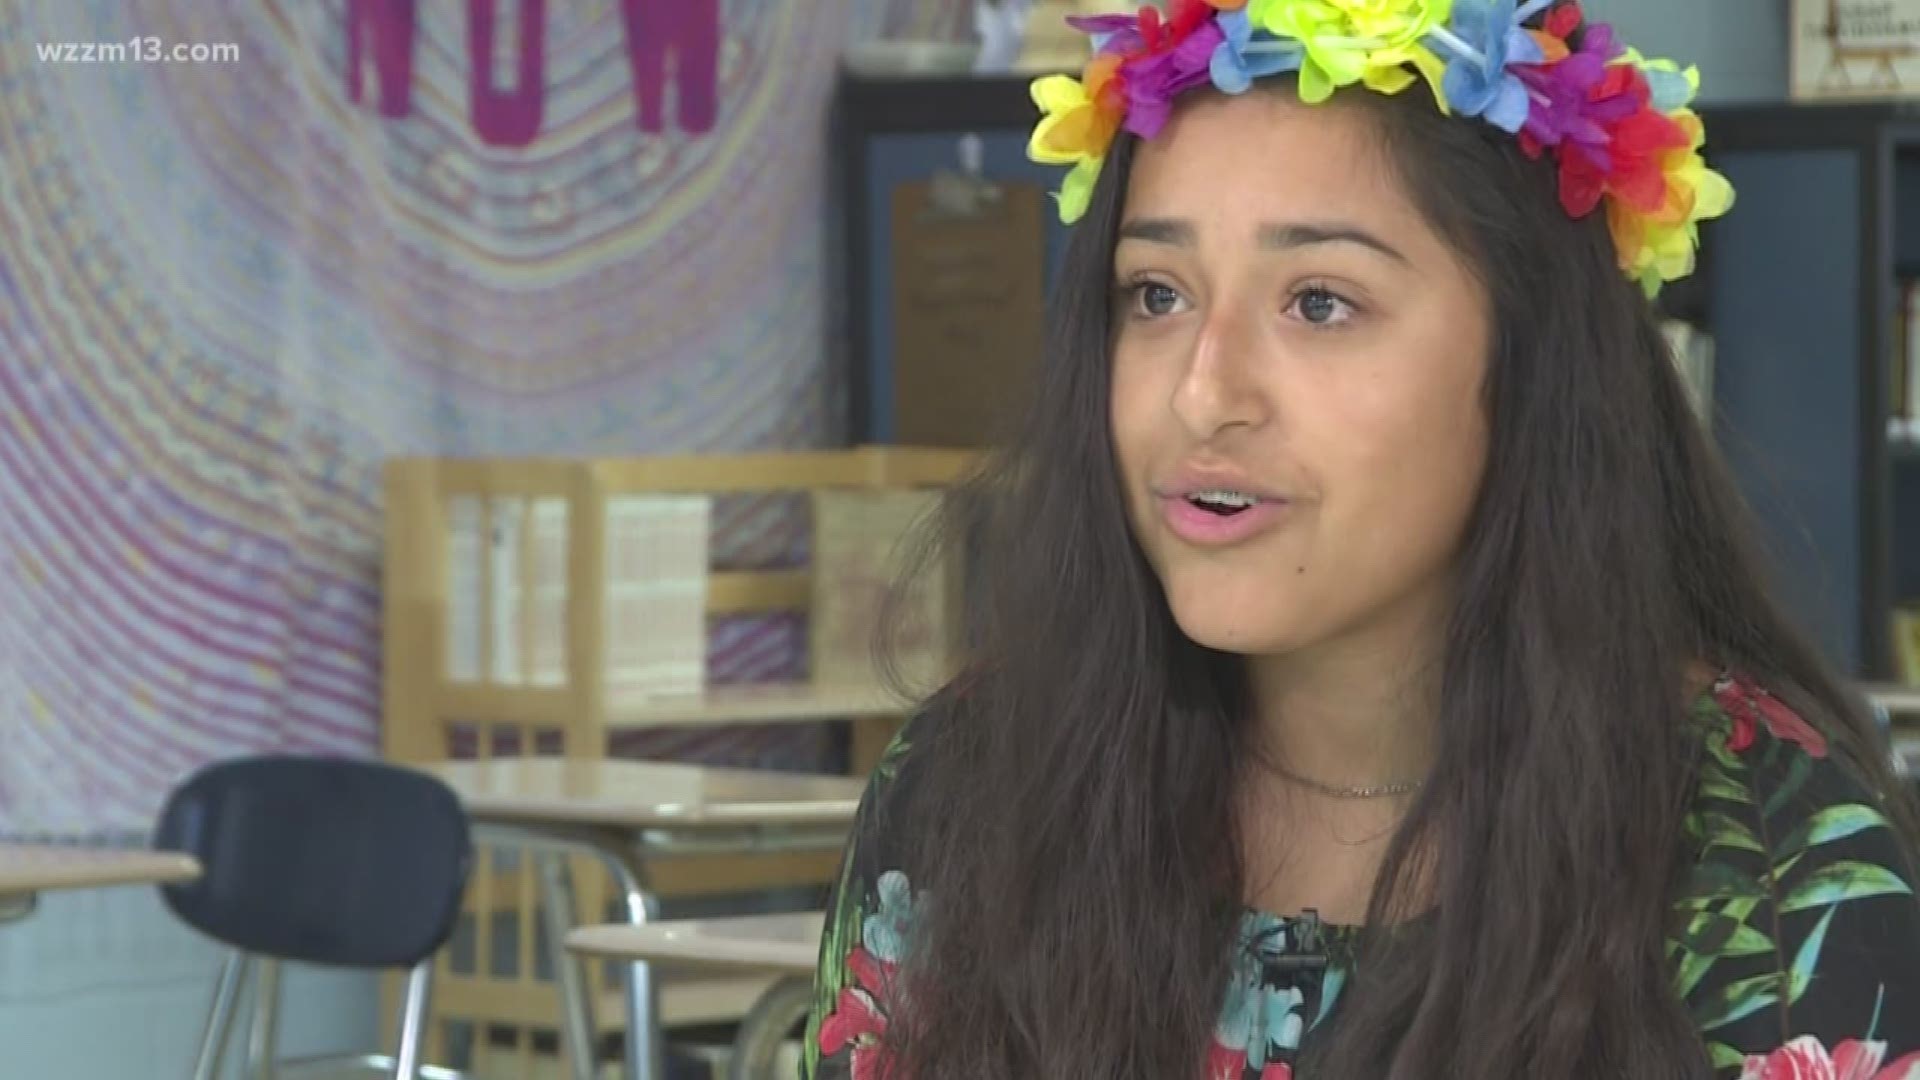 Sunrise Sidelines: Students watch out for each other